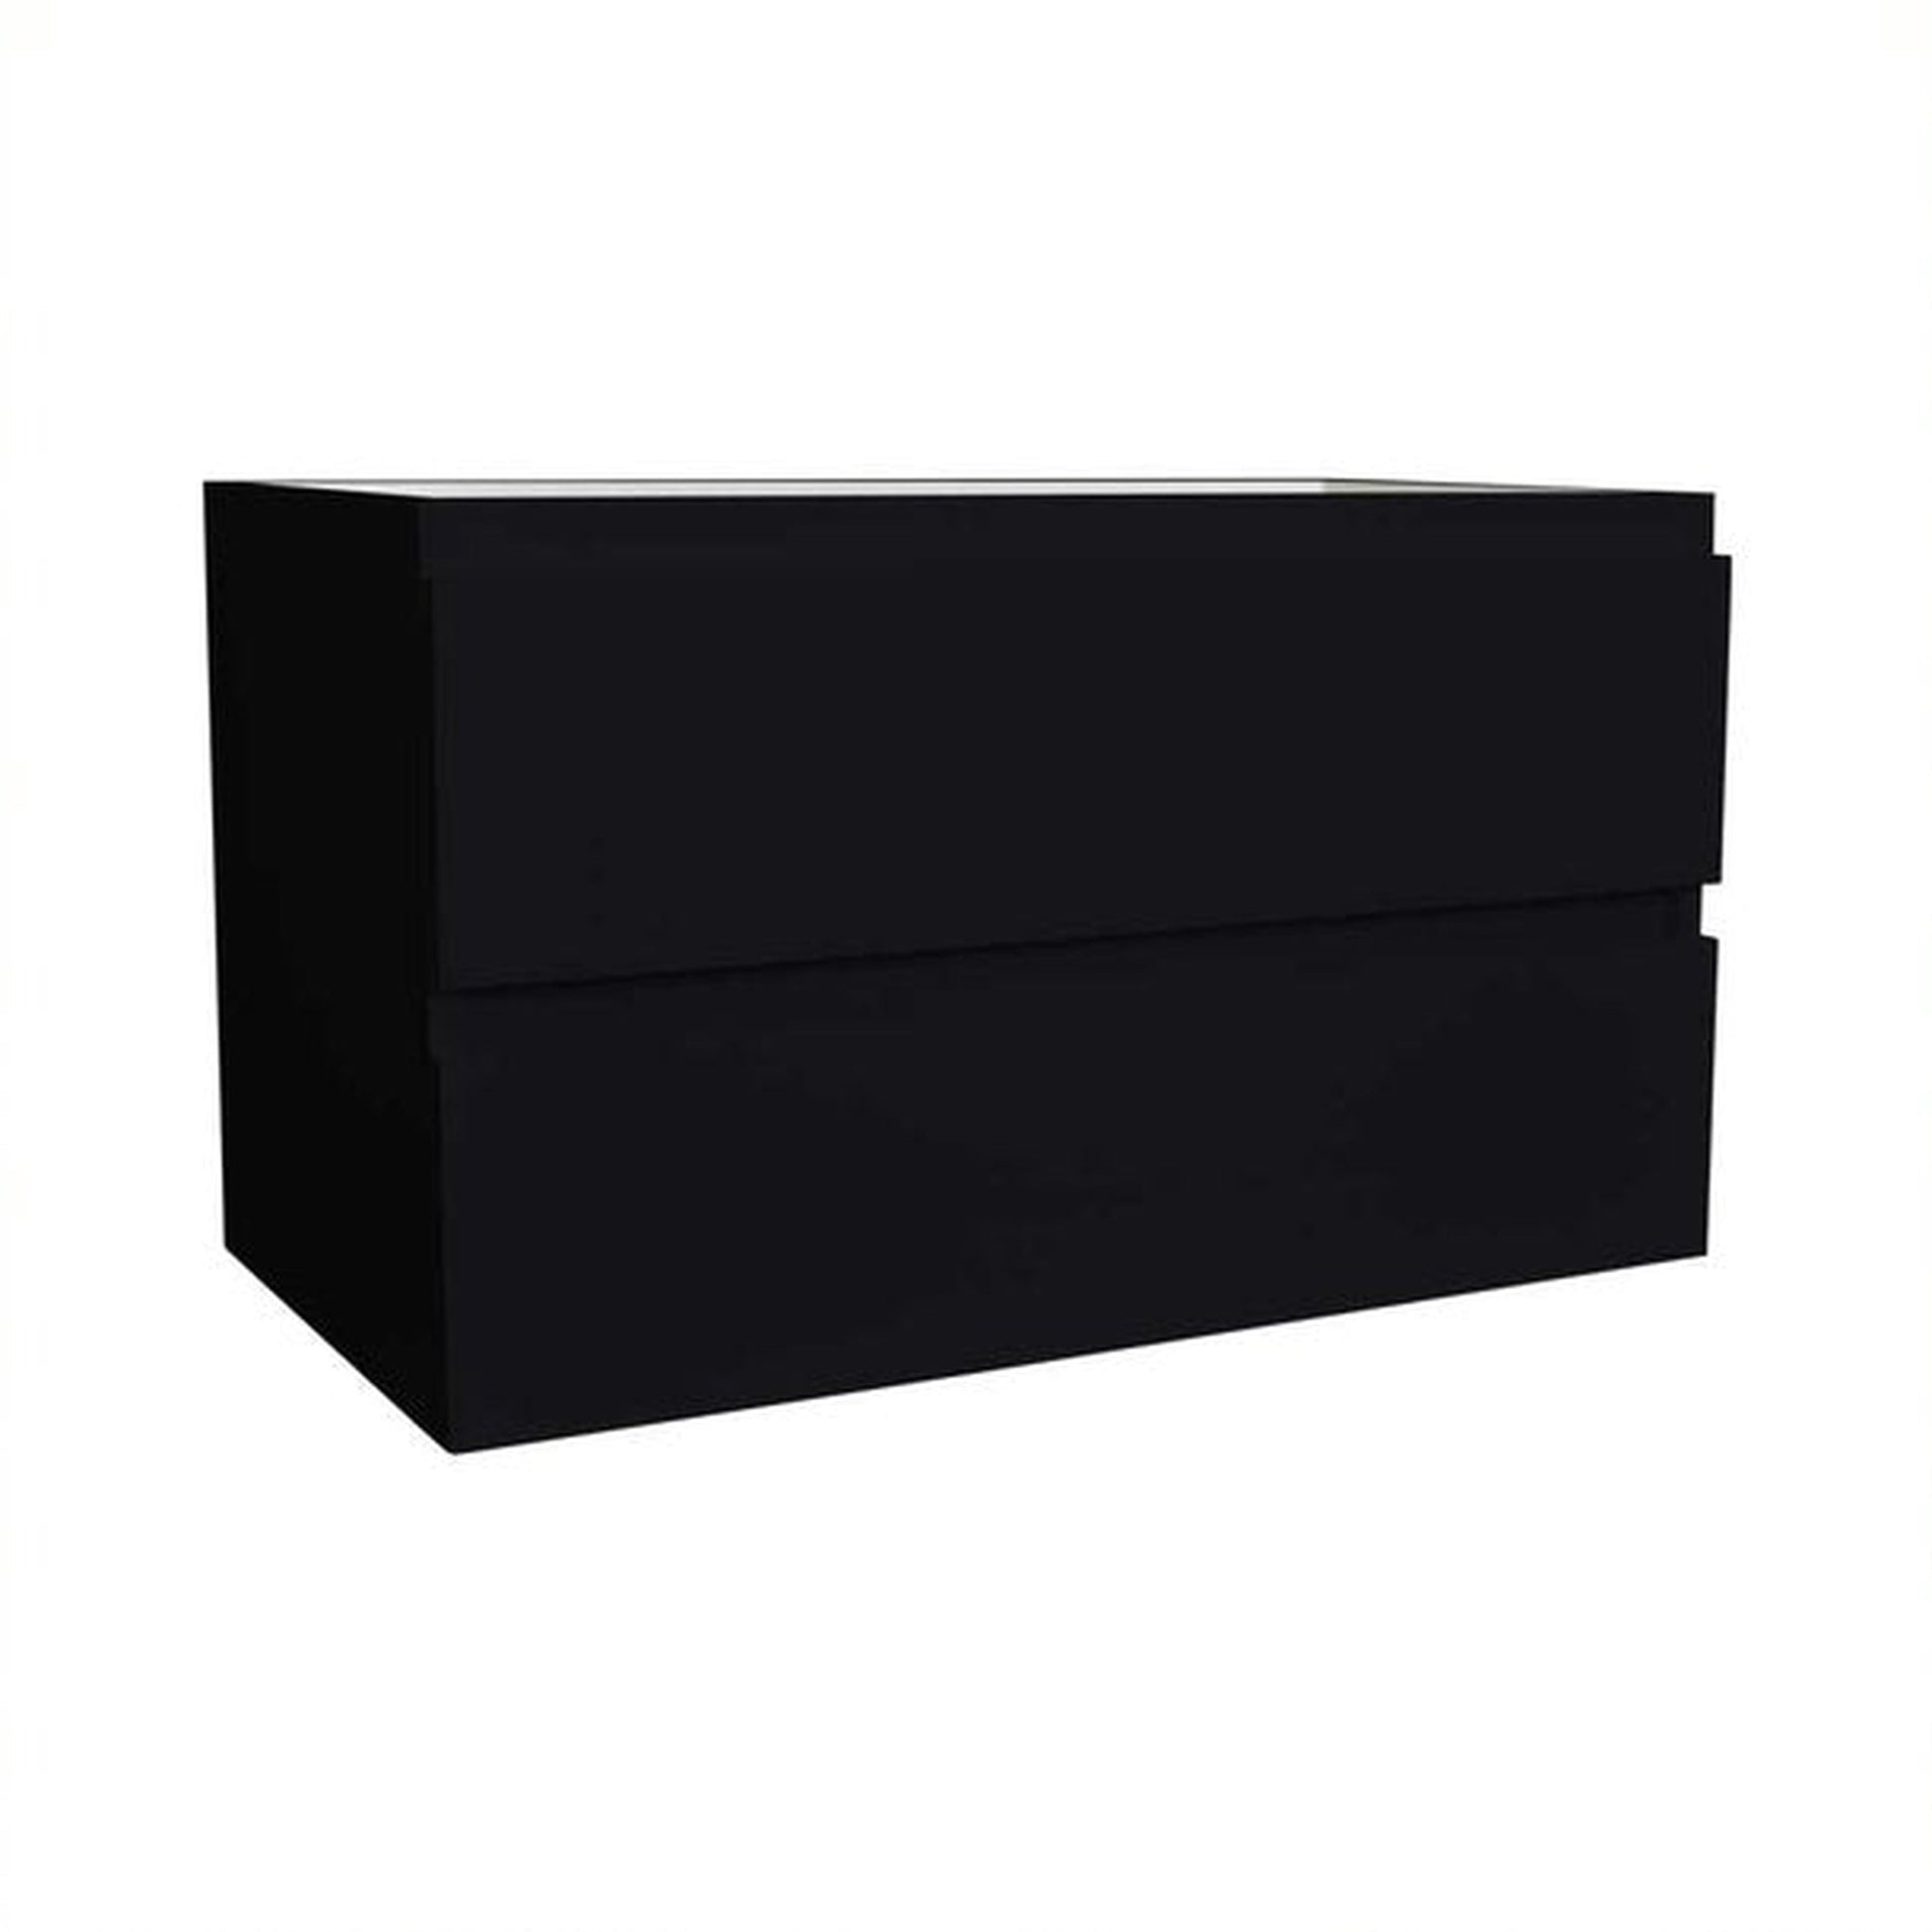 Volpa USA Salt 36" x 18" Black Wall-Mounted Floating Bathroom Vanity Cabinet with Drawers